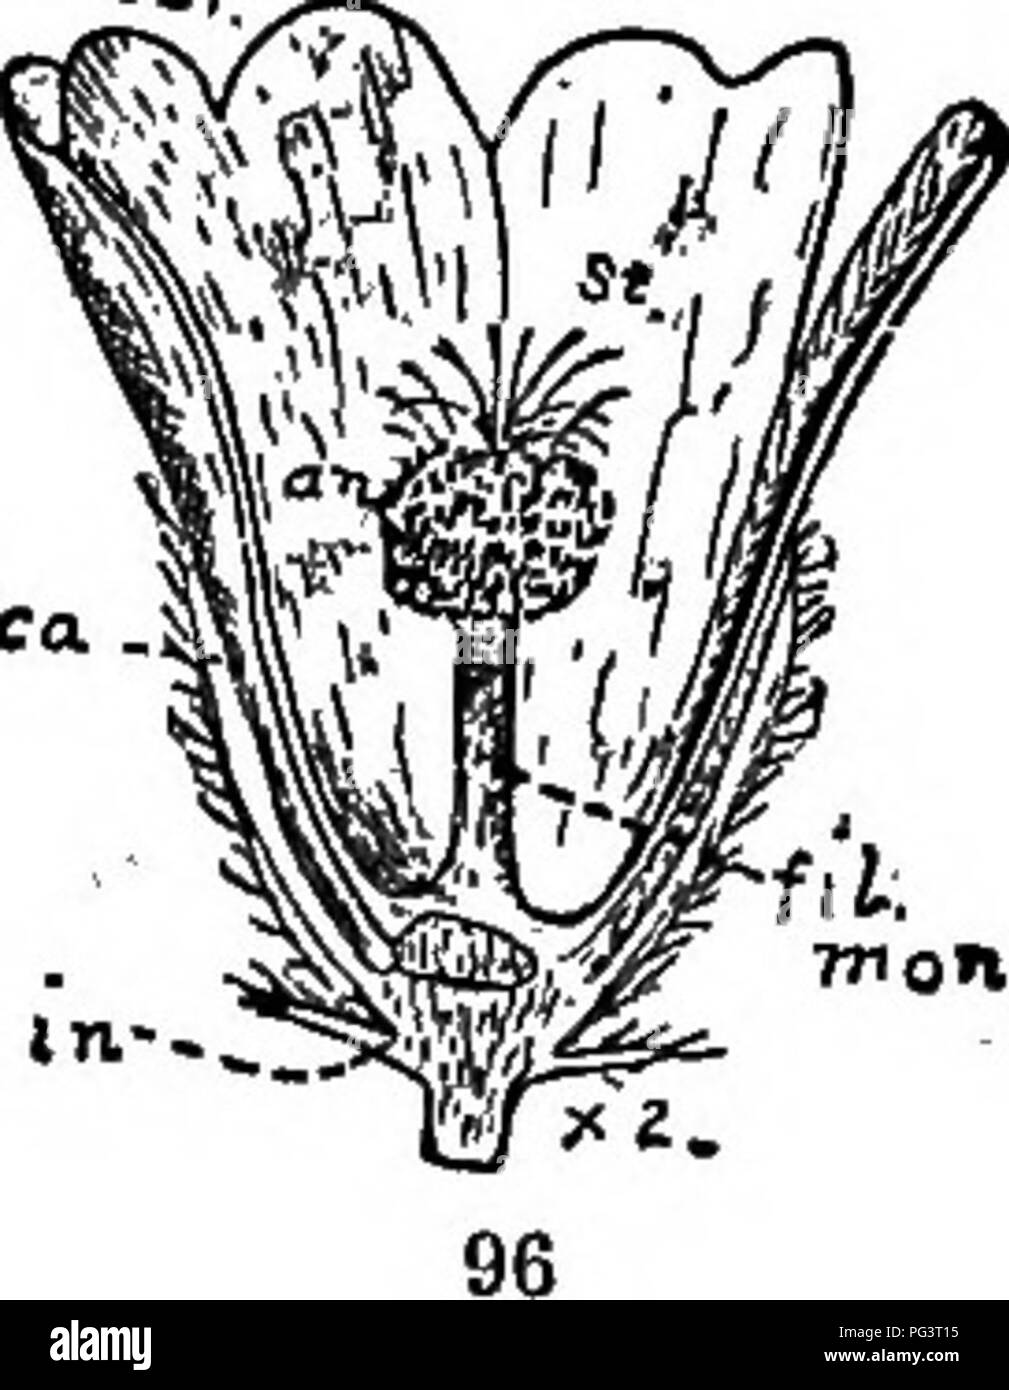 . The elements of botany embracing organography, histology, vegetable physiology, systematic botany and economic botany ... together with a complete glossary of botanical terms. Botany. THE FLOWER. 43 generally composed of spikes or racemes, which are centri- petal in their flowering. 51. The flower is that organ of the plant which is designed for the production of seed, and thereby the continued existence of its kind. In a complete flower, such as the Buttercup, Rose, Phlox, etc., there is externally the calyx (Fig. 96, ea), or cup-like portion, which consists of several parts, either distinc Stock Photo